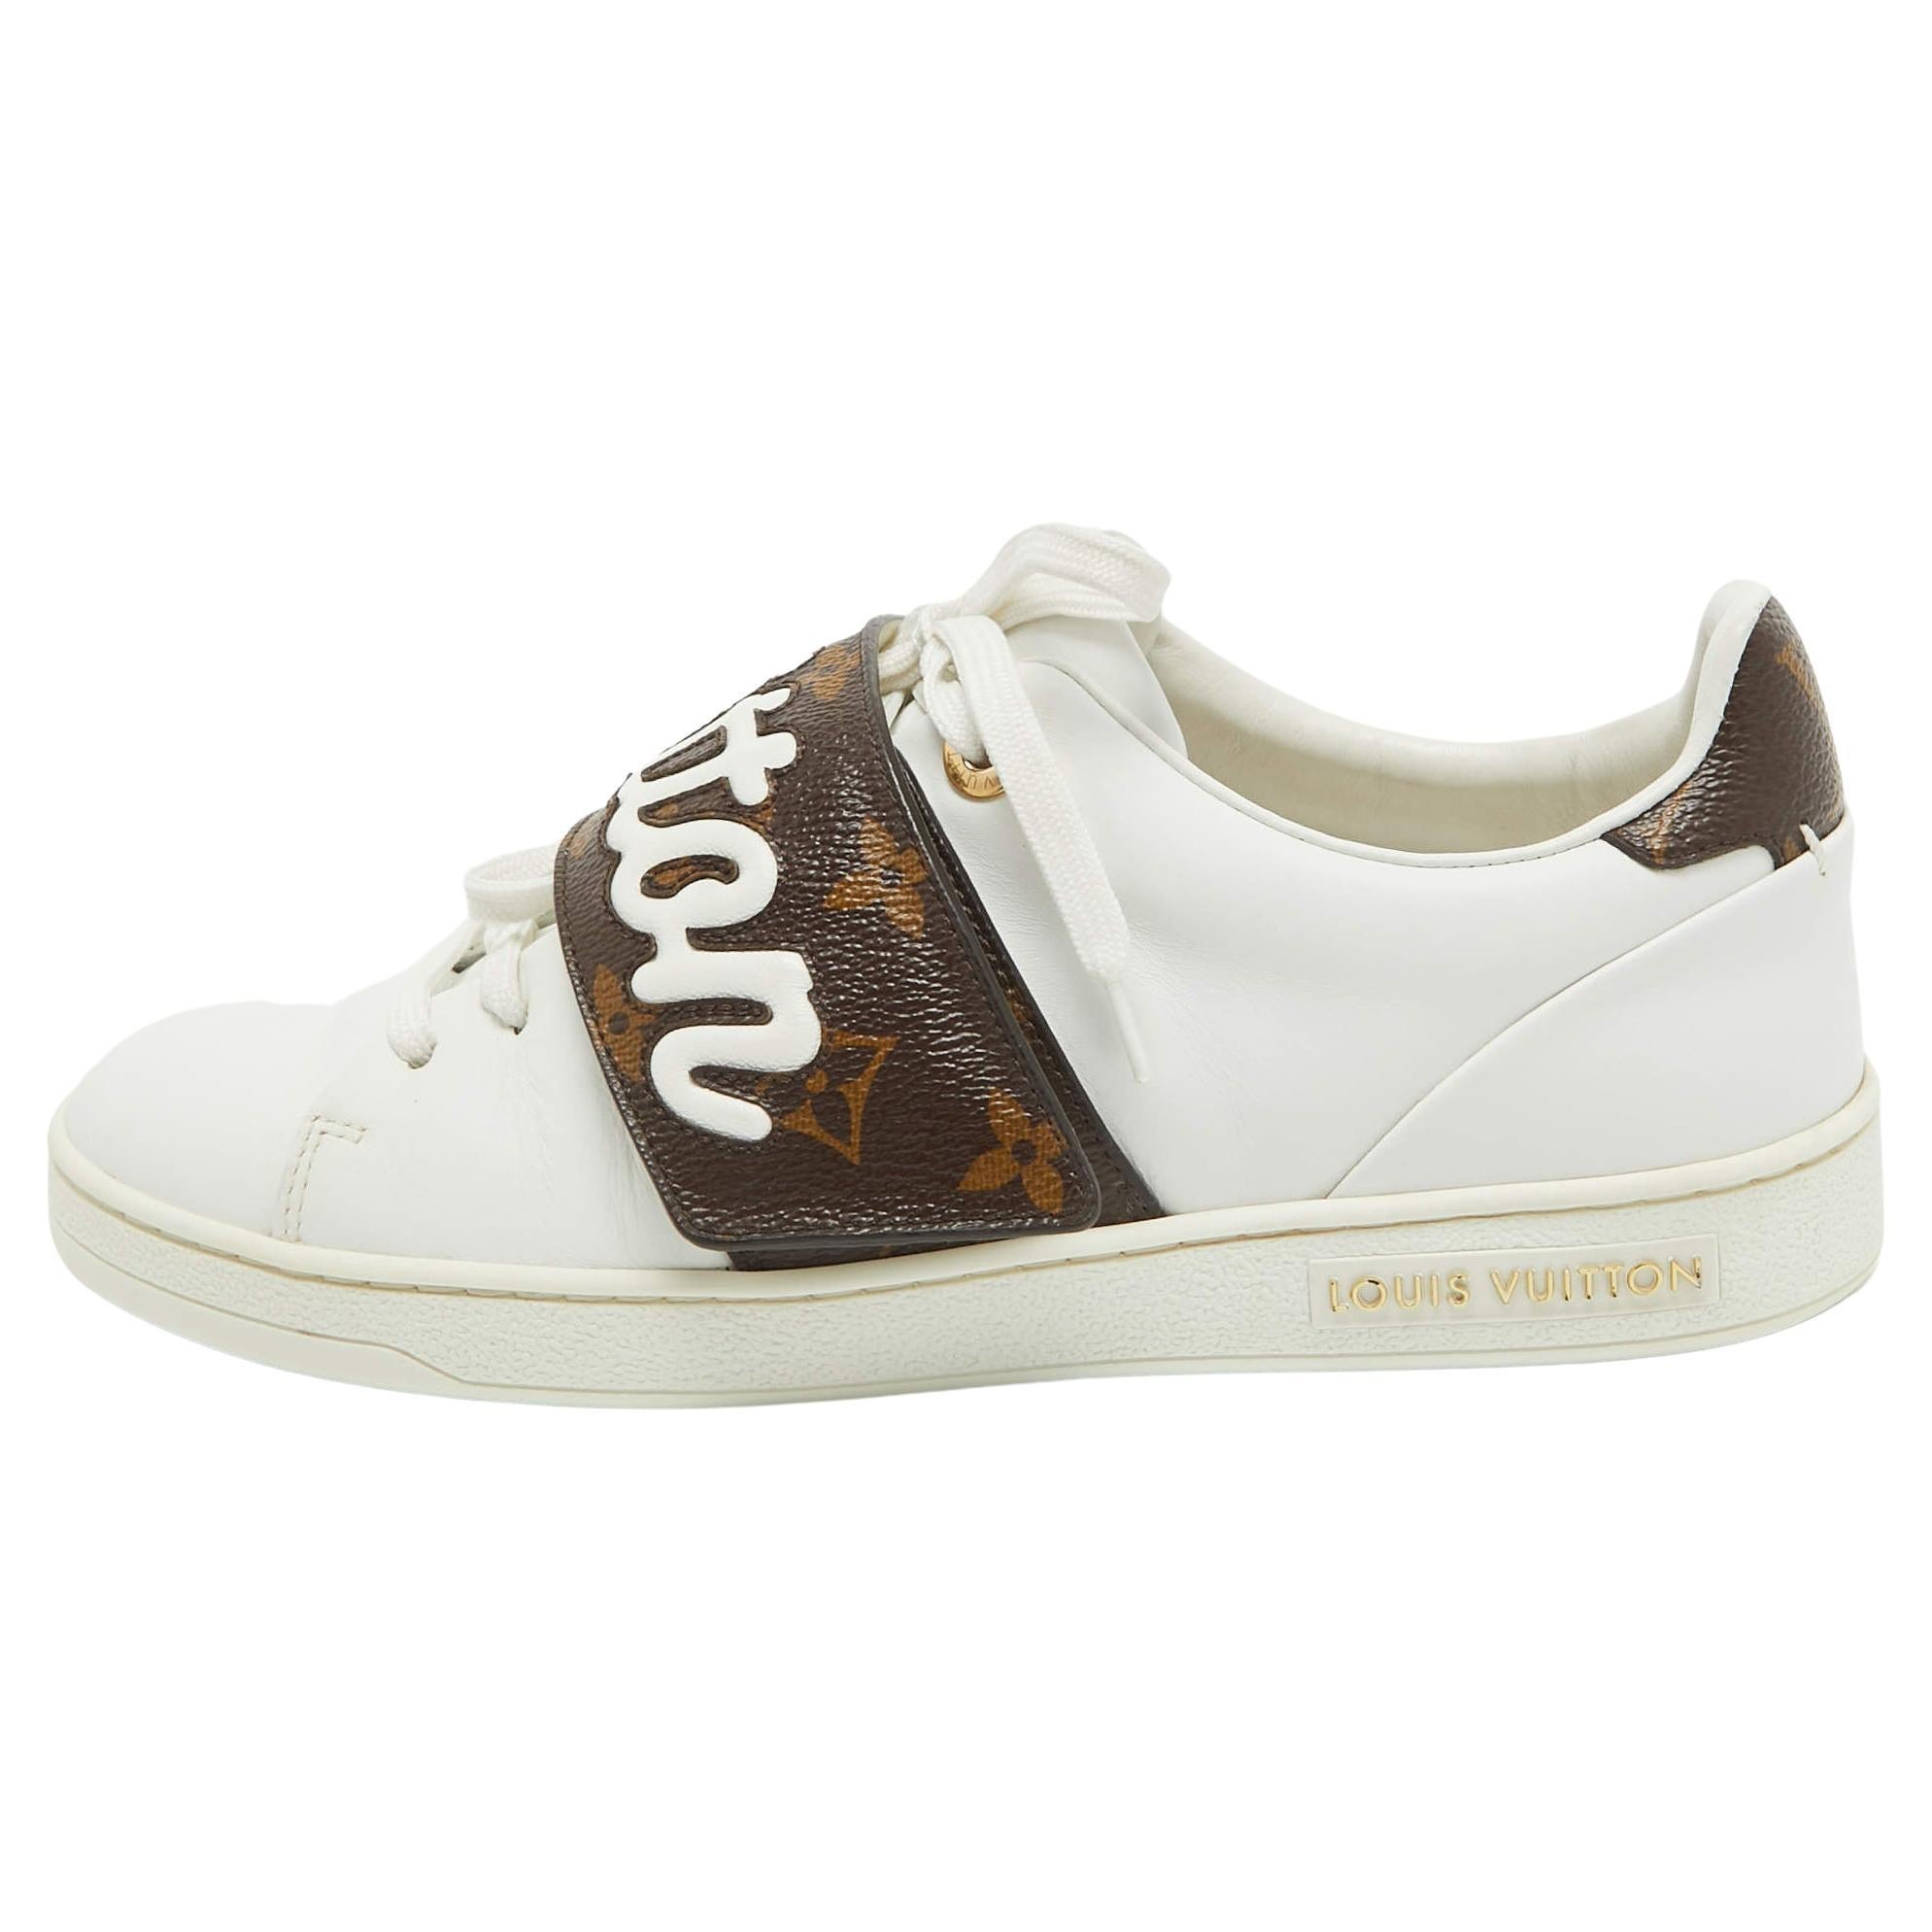 Louis Vuitton White/Brown Monogram Canvas and Leather Low Top Sneakers Size 35.5 For Sale